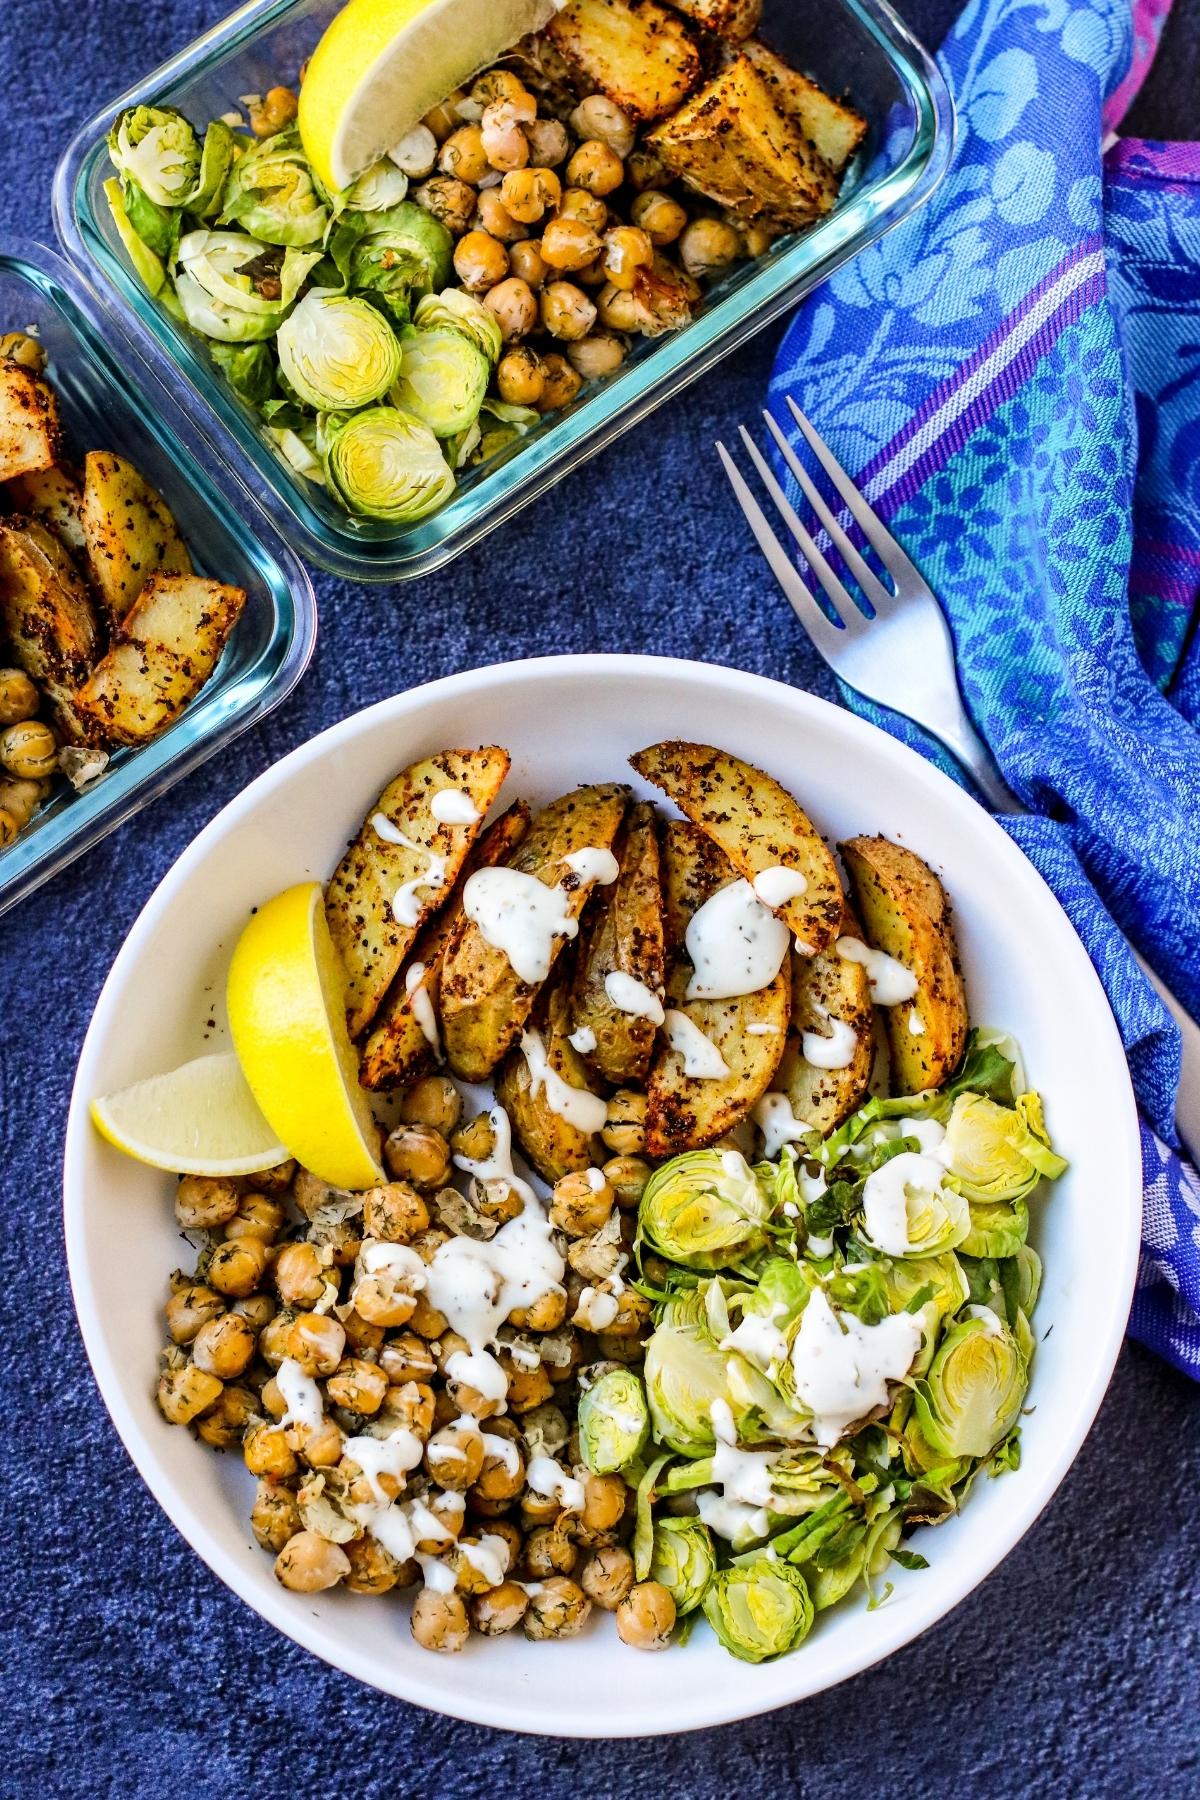 Chickpea Bowl with potatoes and Brussels sprouts drizzled with sauce with meal prep containers in the background.